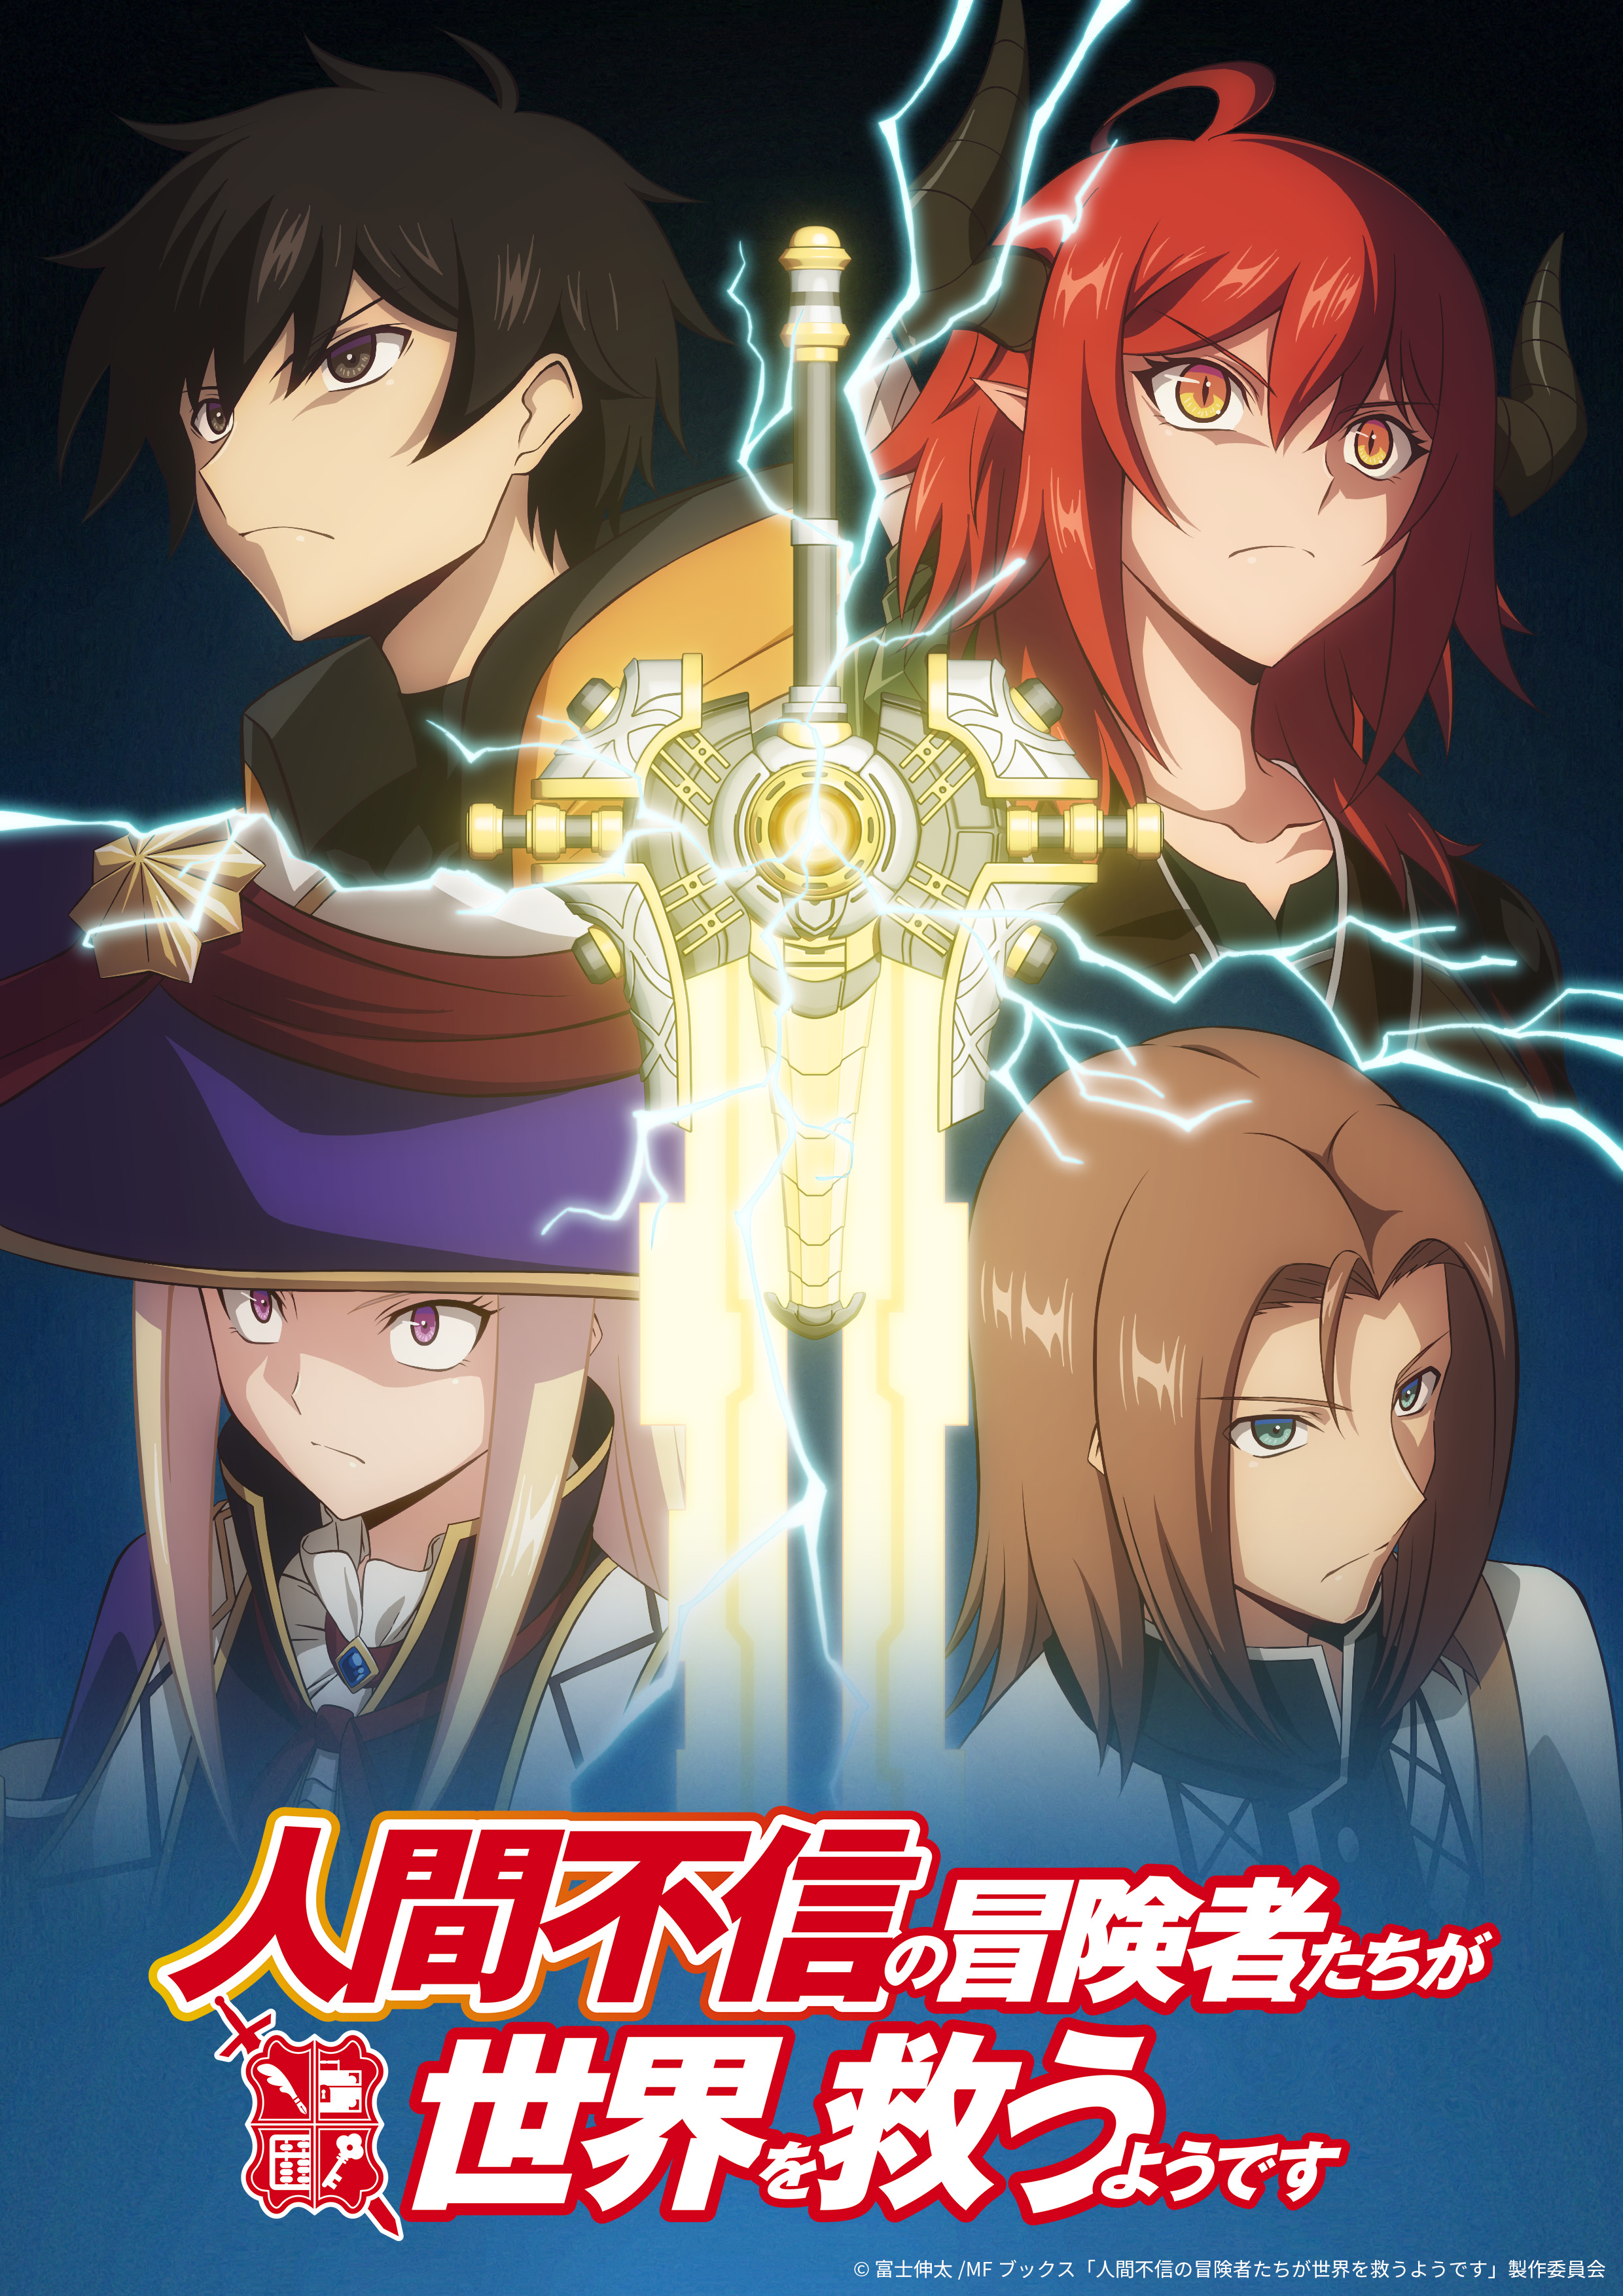 Apparently, Disillusioned Adventurers Will Save the World anime teaser visual